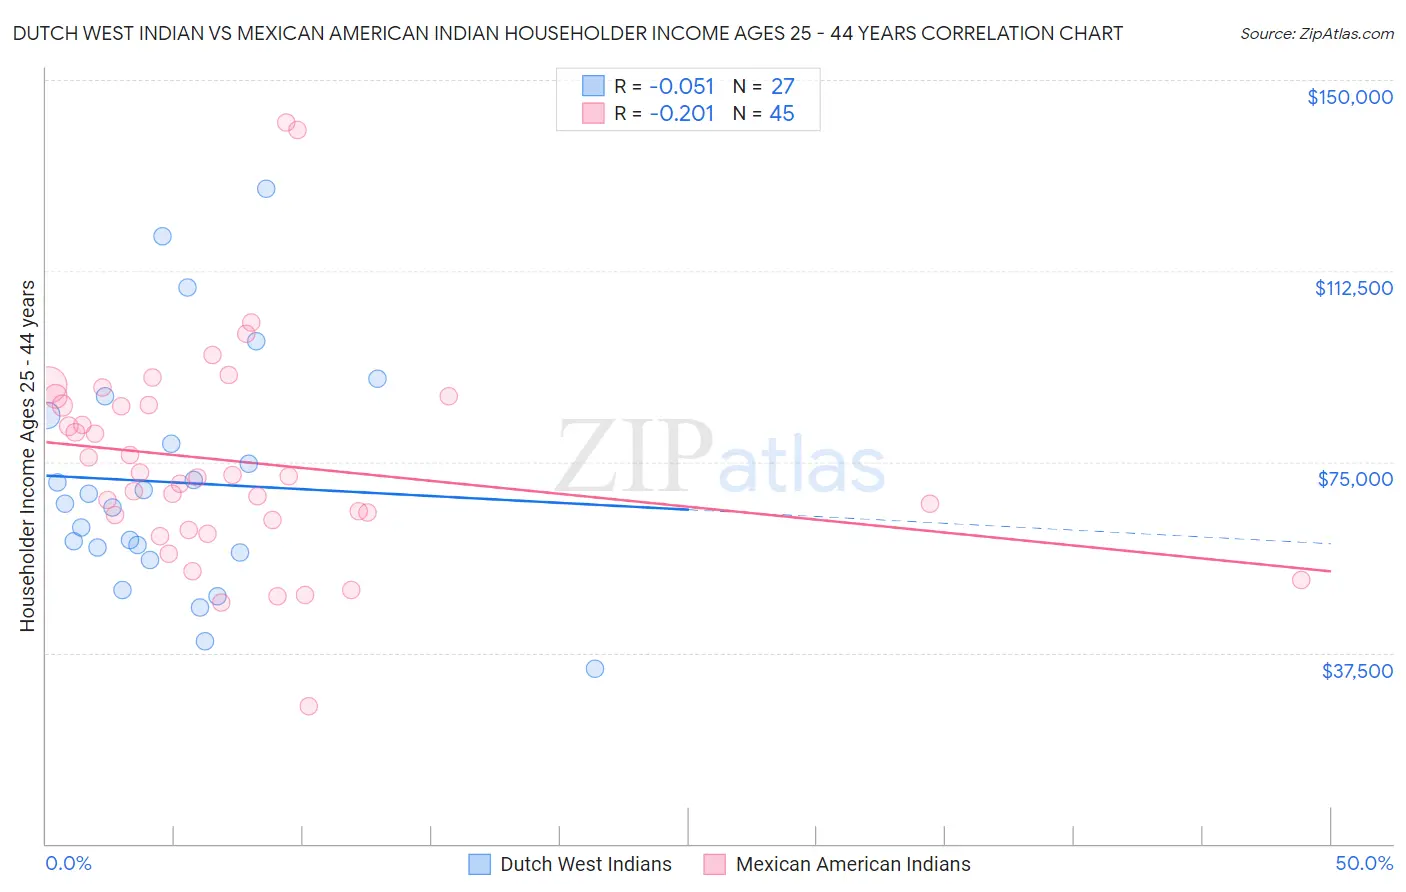 Dutch West Indian vs Mexican American Indian Householder Income Ages 25 - 44 years